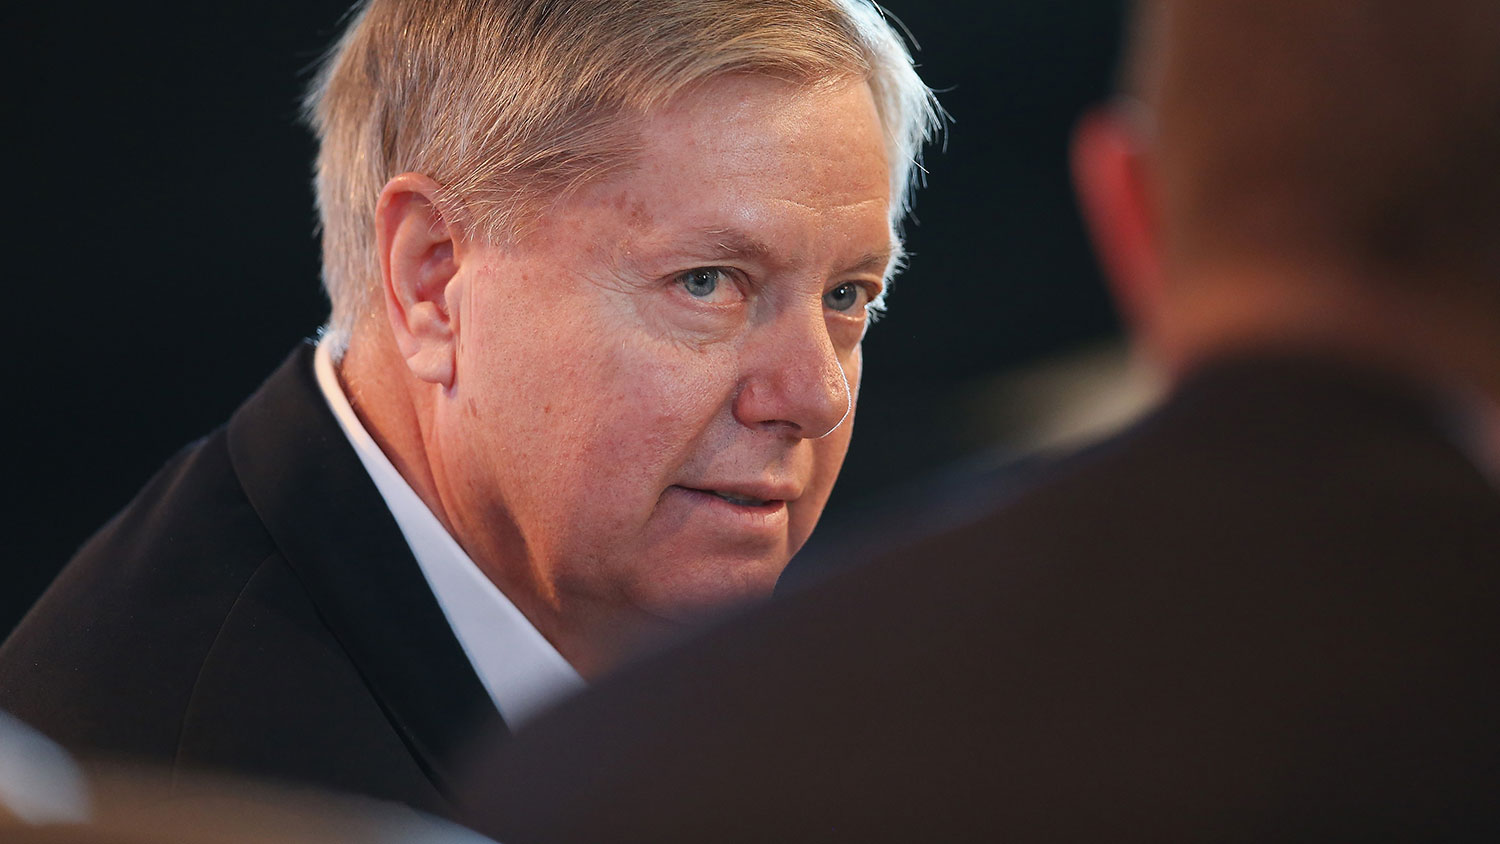 U.S. Senator Lindsey Graham (R-SC) fields questions from Bruce Rastetter at the Iowa Ag Summit on March 7, 2015 in Des Moines, Iowa.
